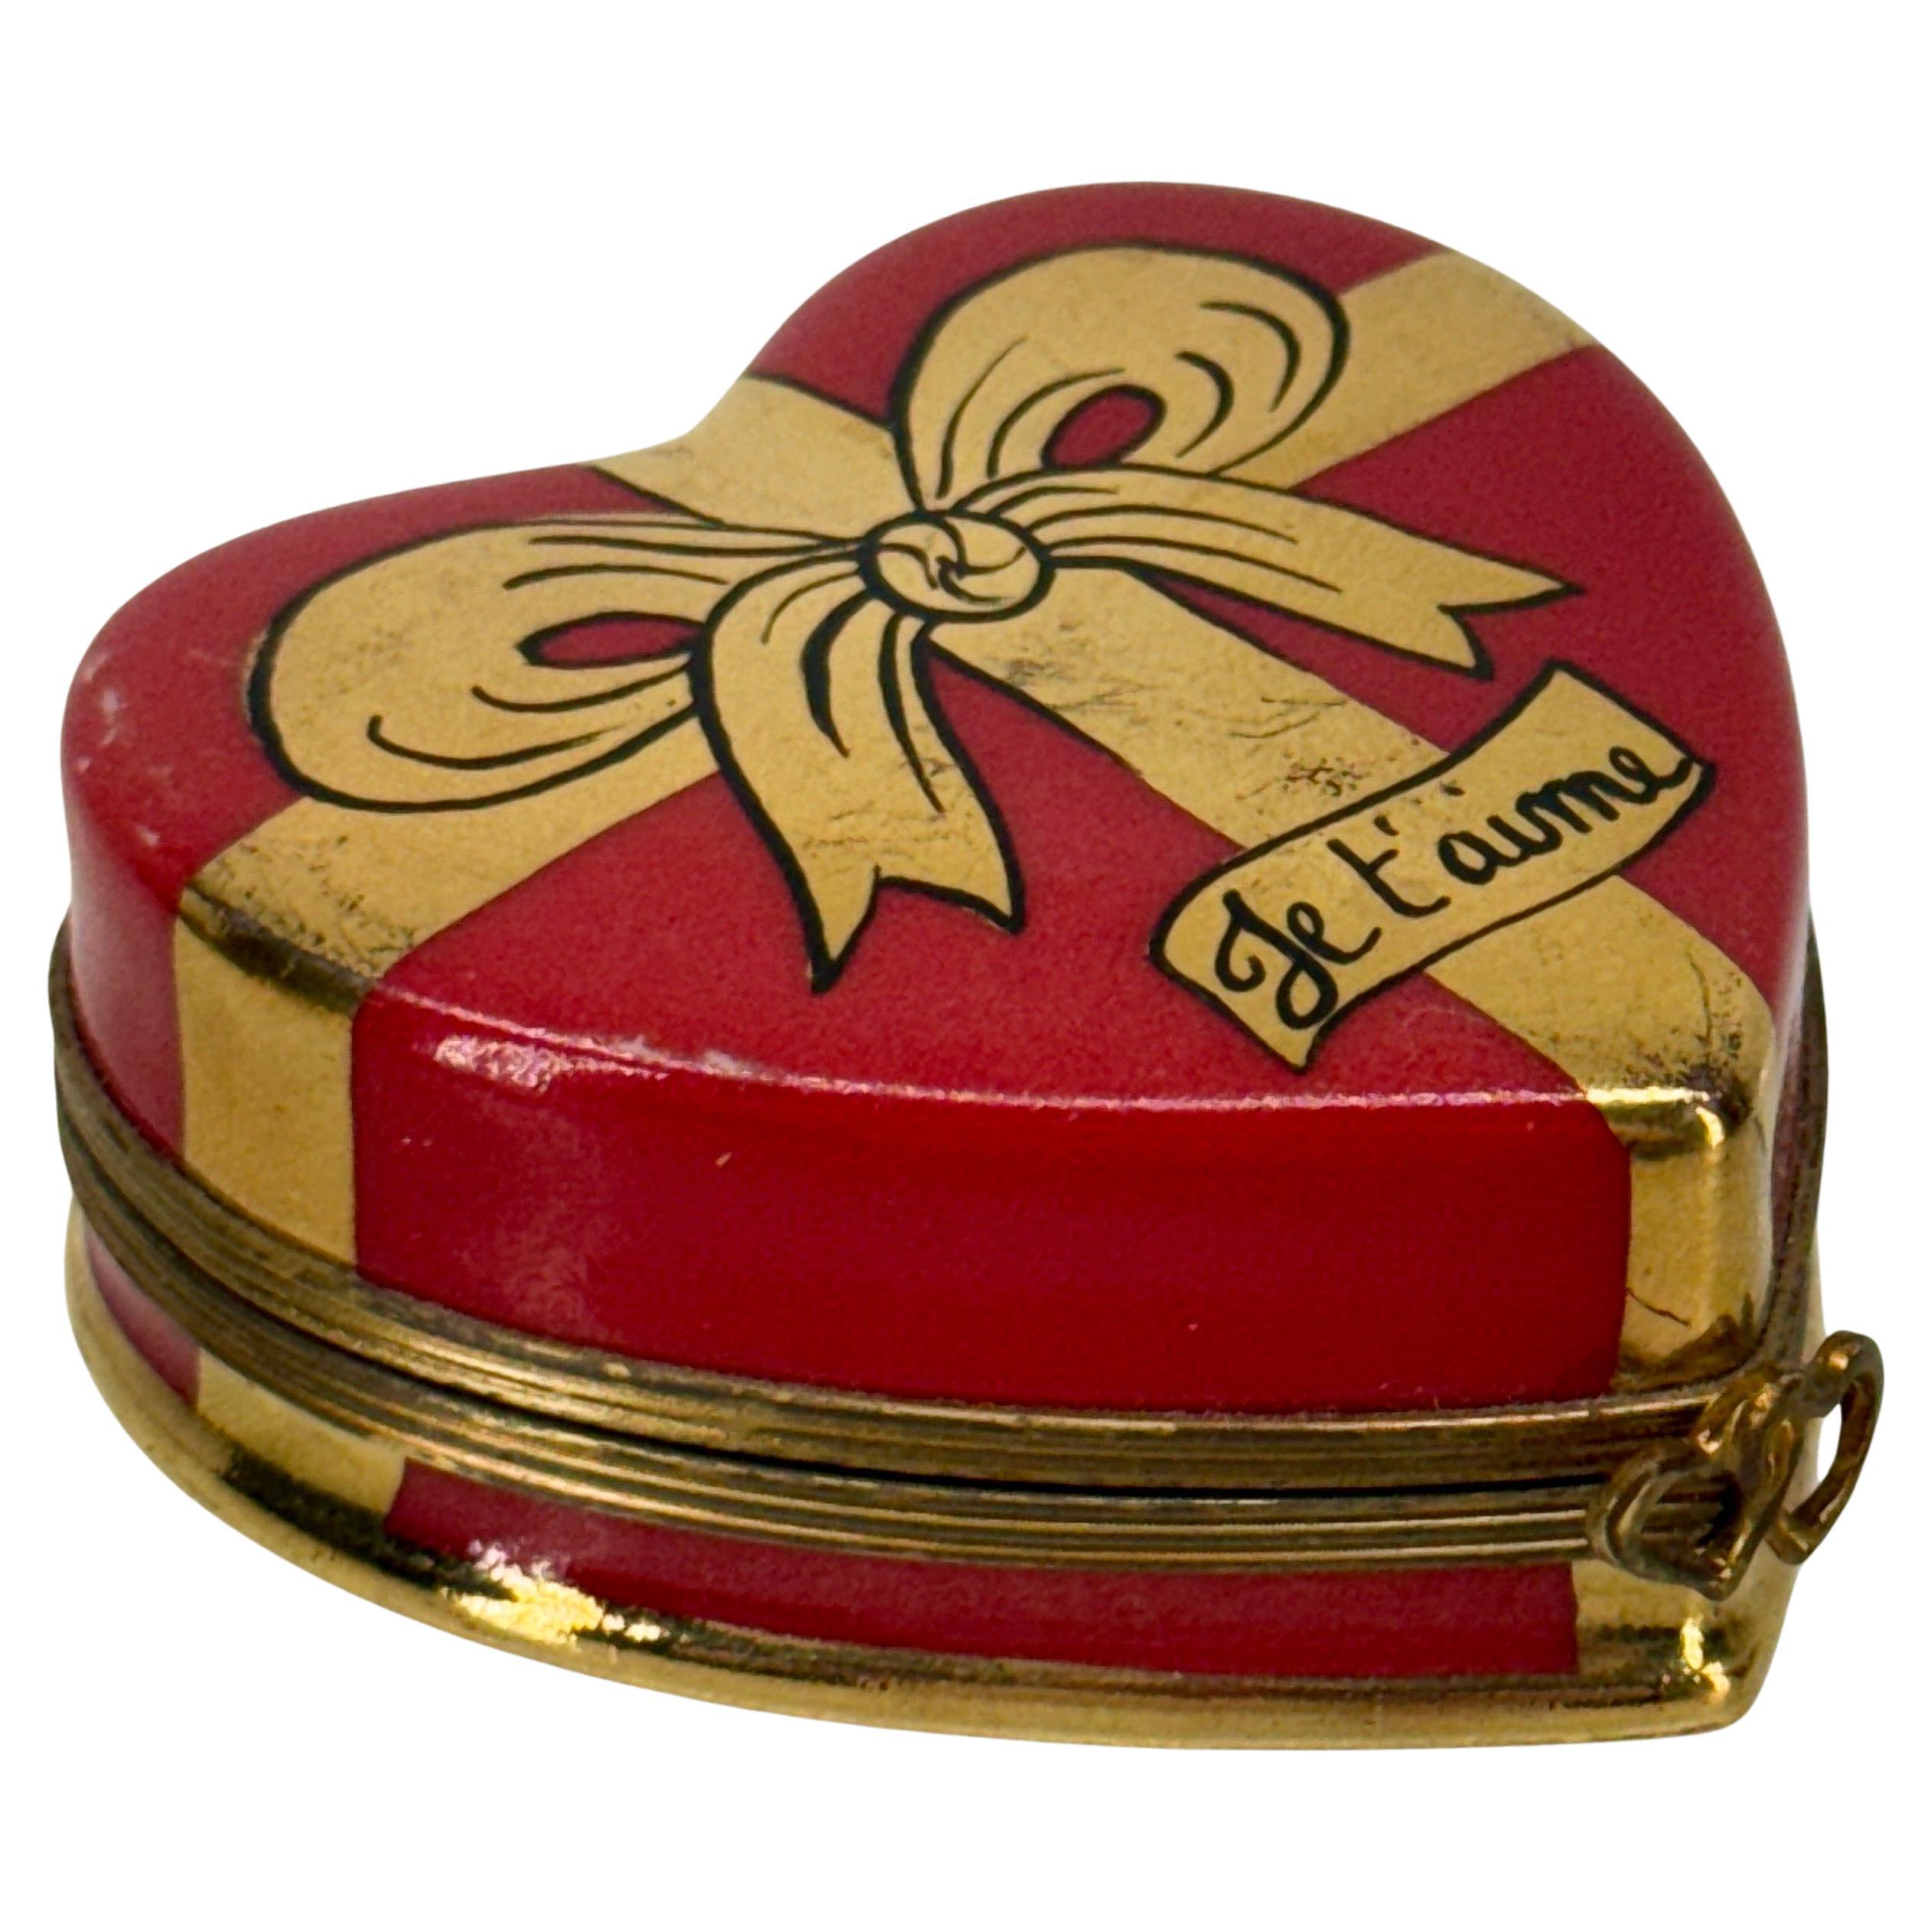 Charming Limoges red heart trinket box with 22KT gold ribbon and bow. A banner, with “Je t’aime” (I love you) is written across the bottom. Two small intertwined hearts is the clasp that keeps this box closed. The inside top reads “Not just